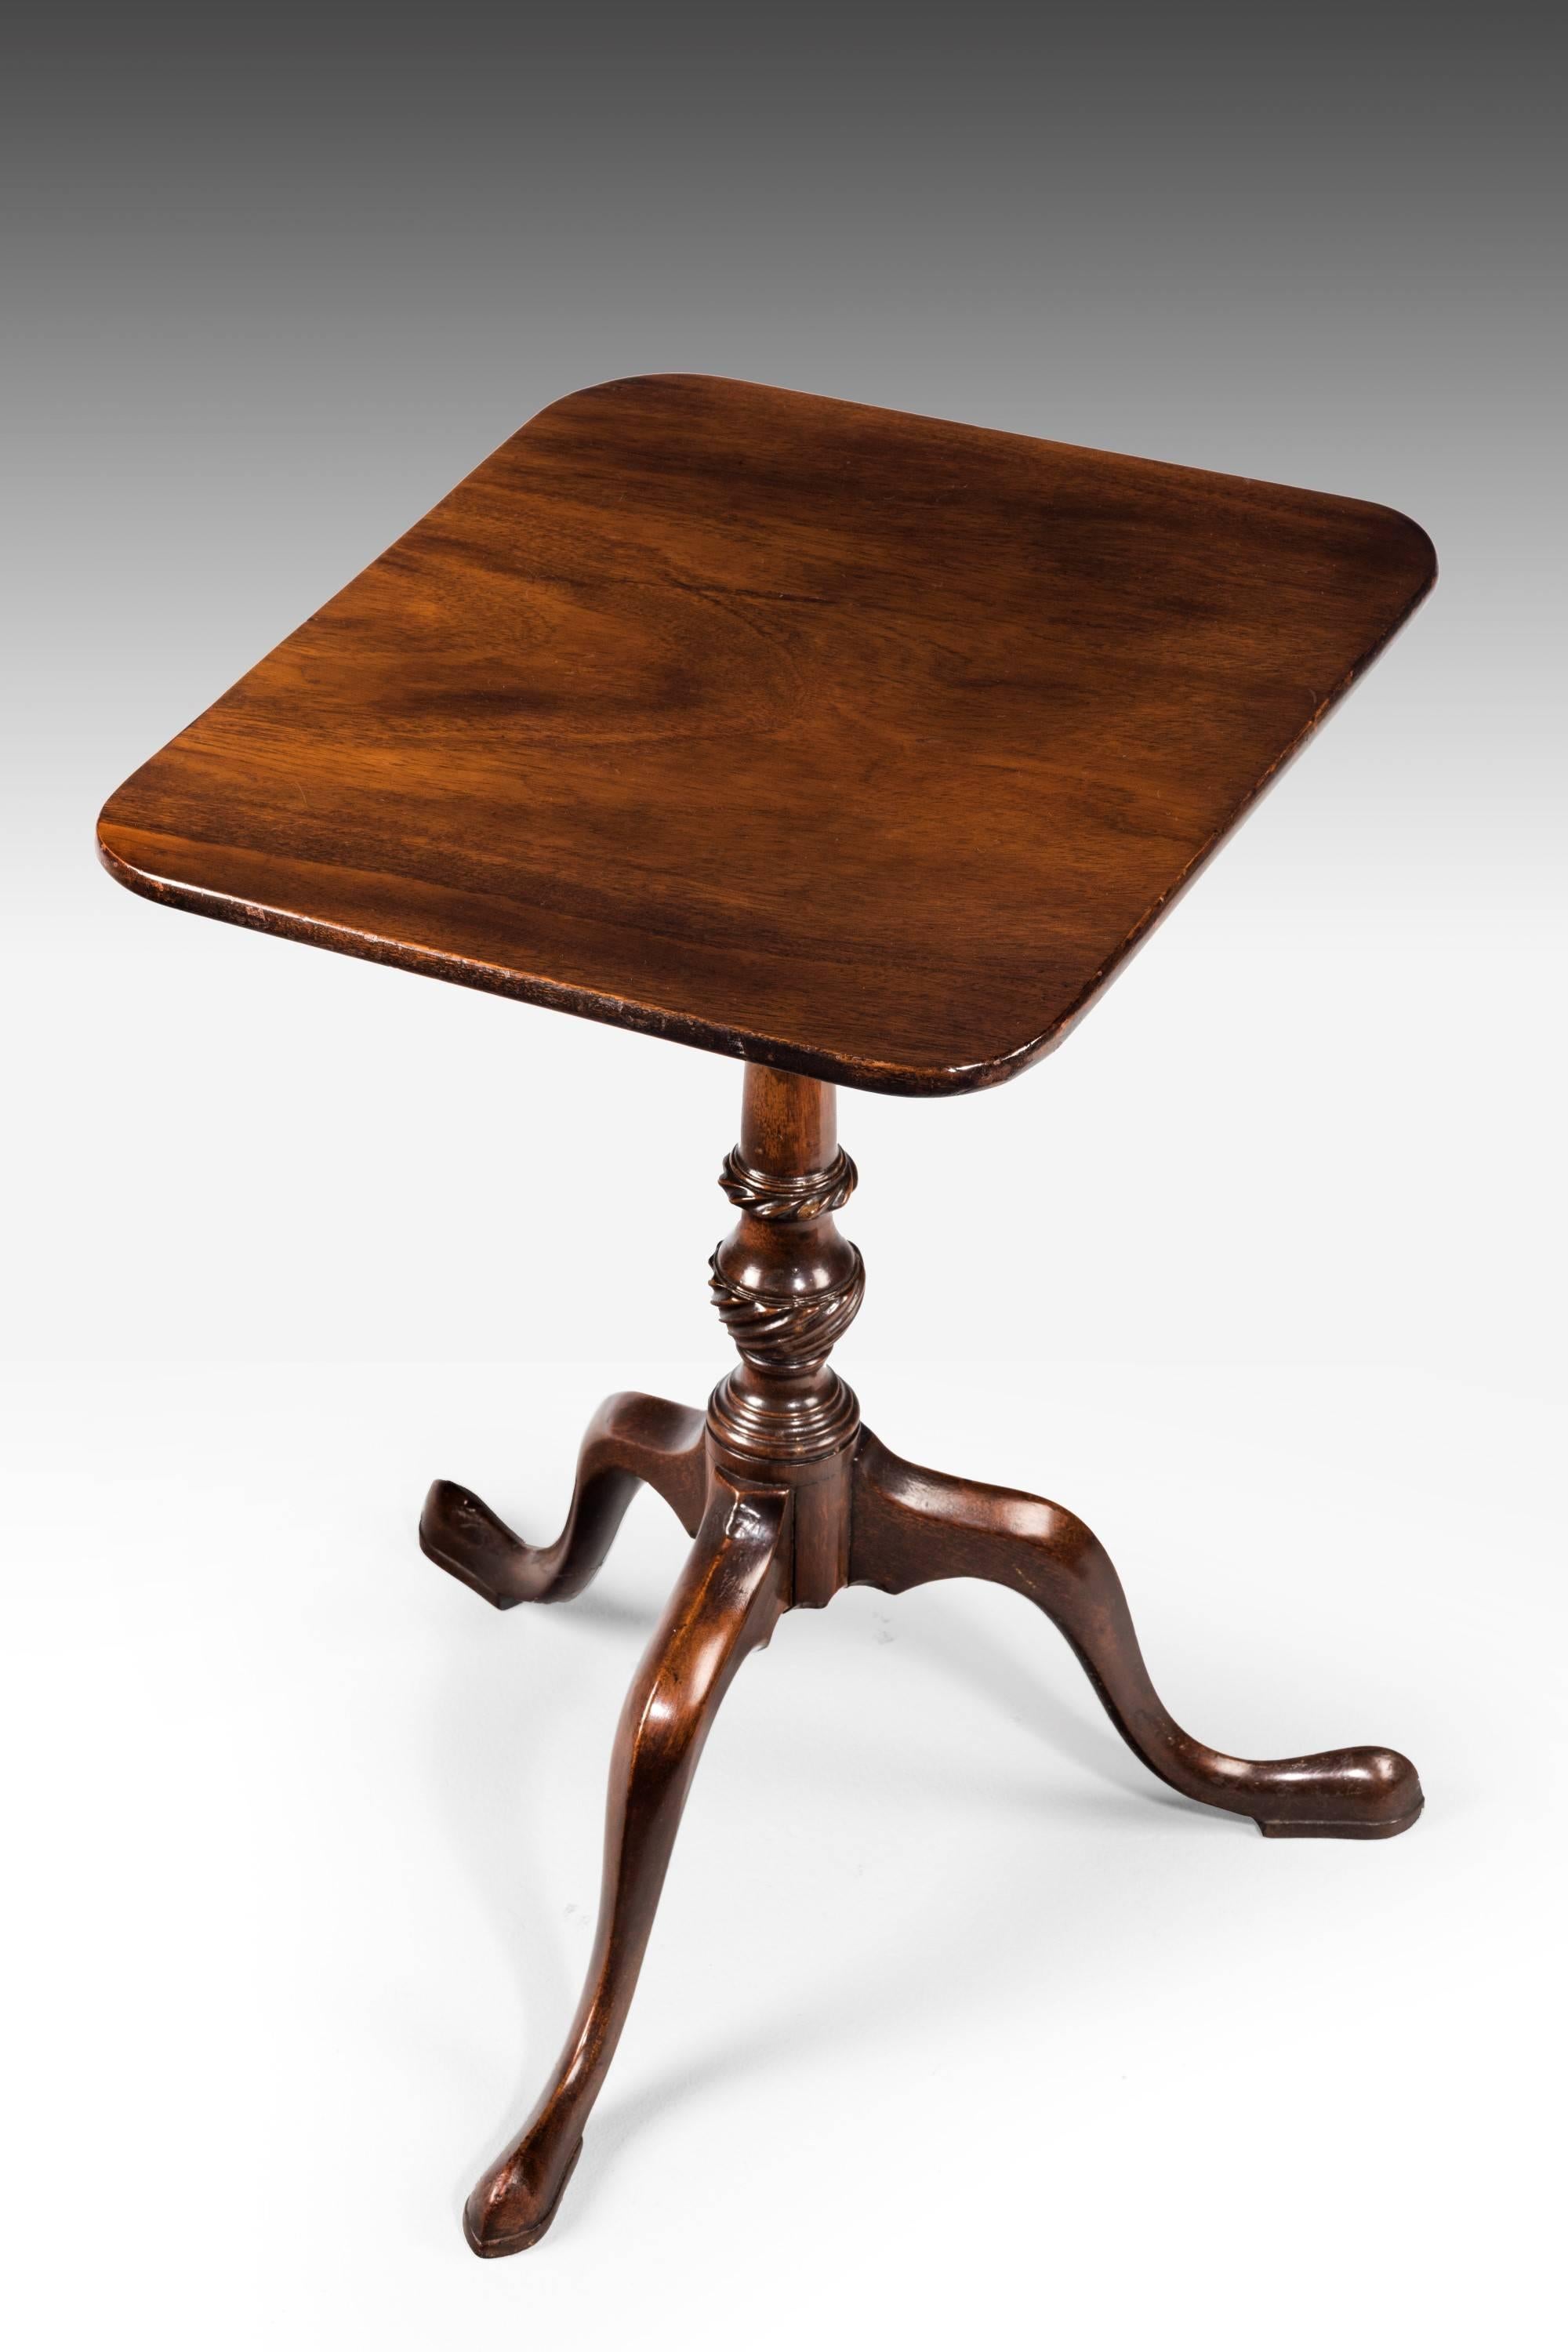 An usually small mahogany tilt table. Finely turned centre stem with writhen sections. Very good color.